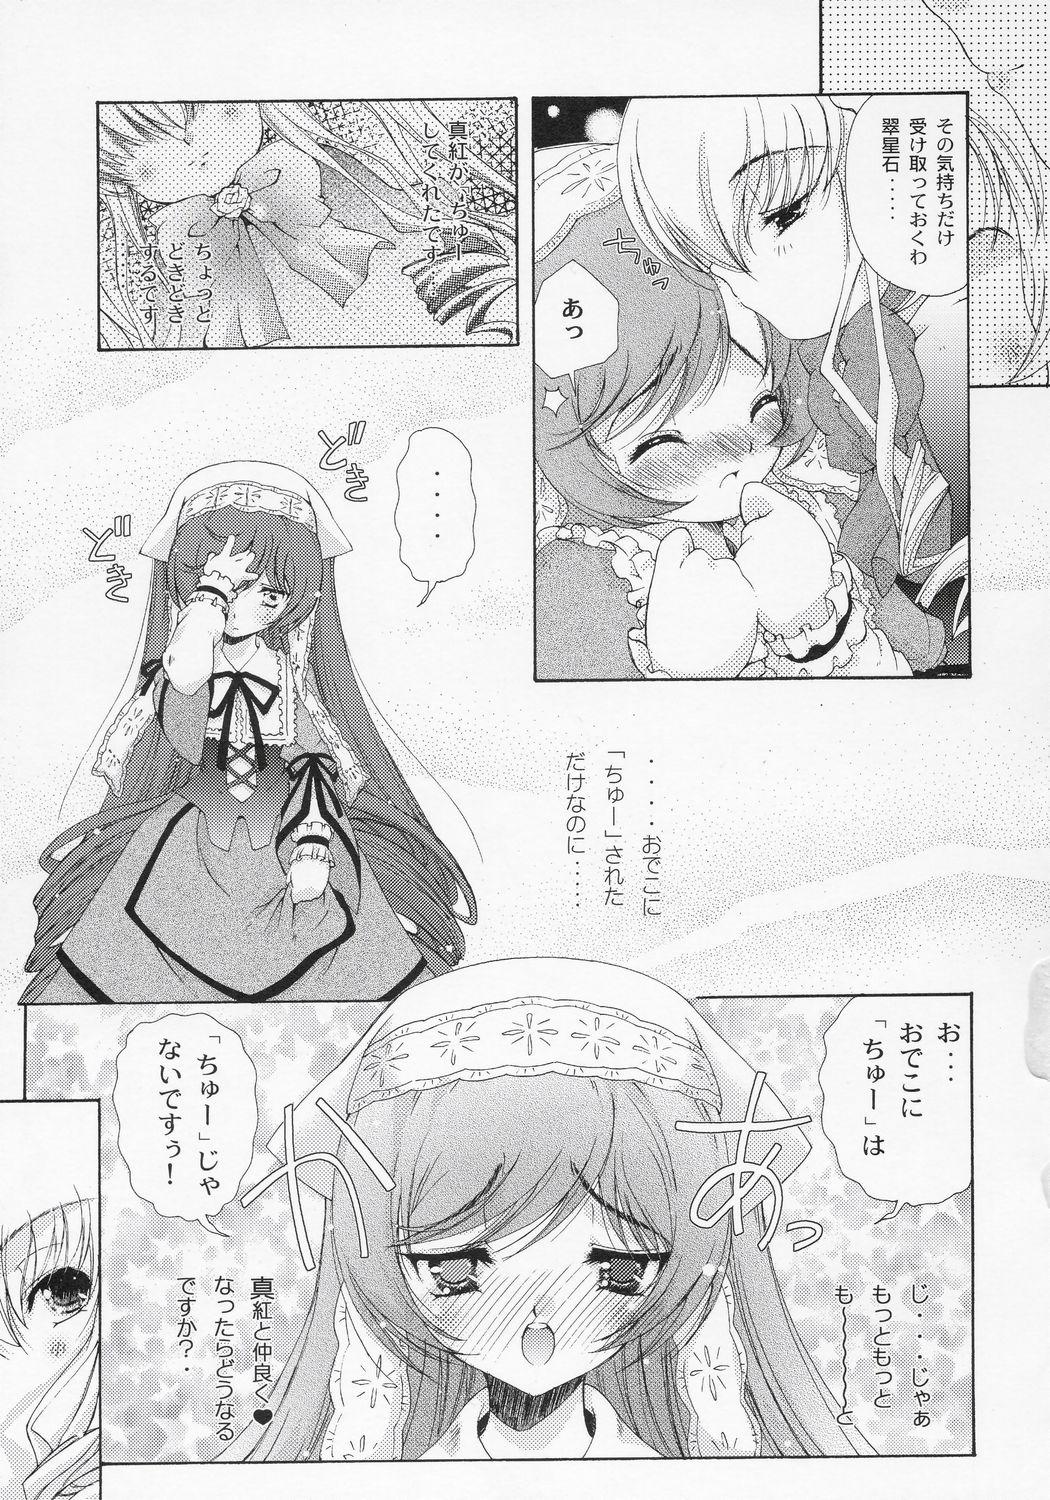 Awesome Dolls Party - Rozen maiden Porra - Page 8